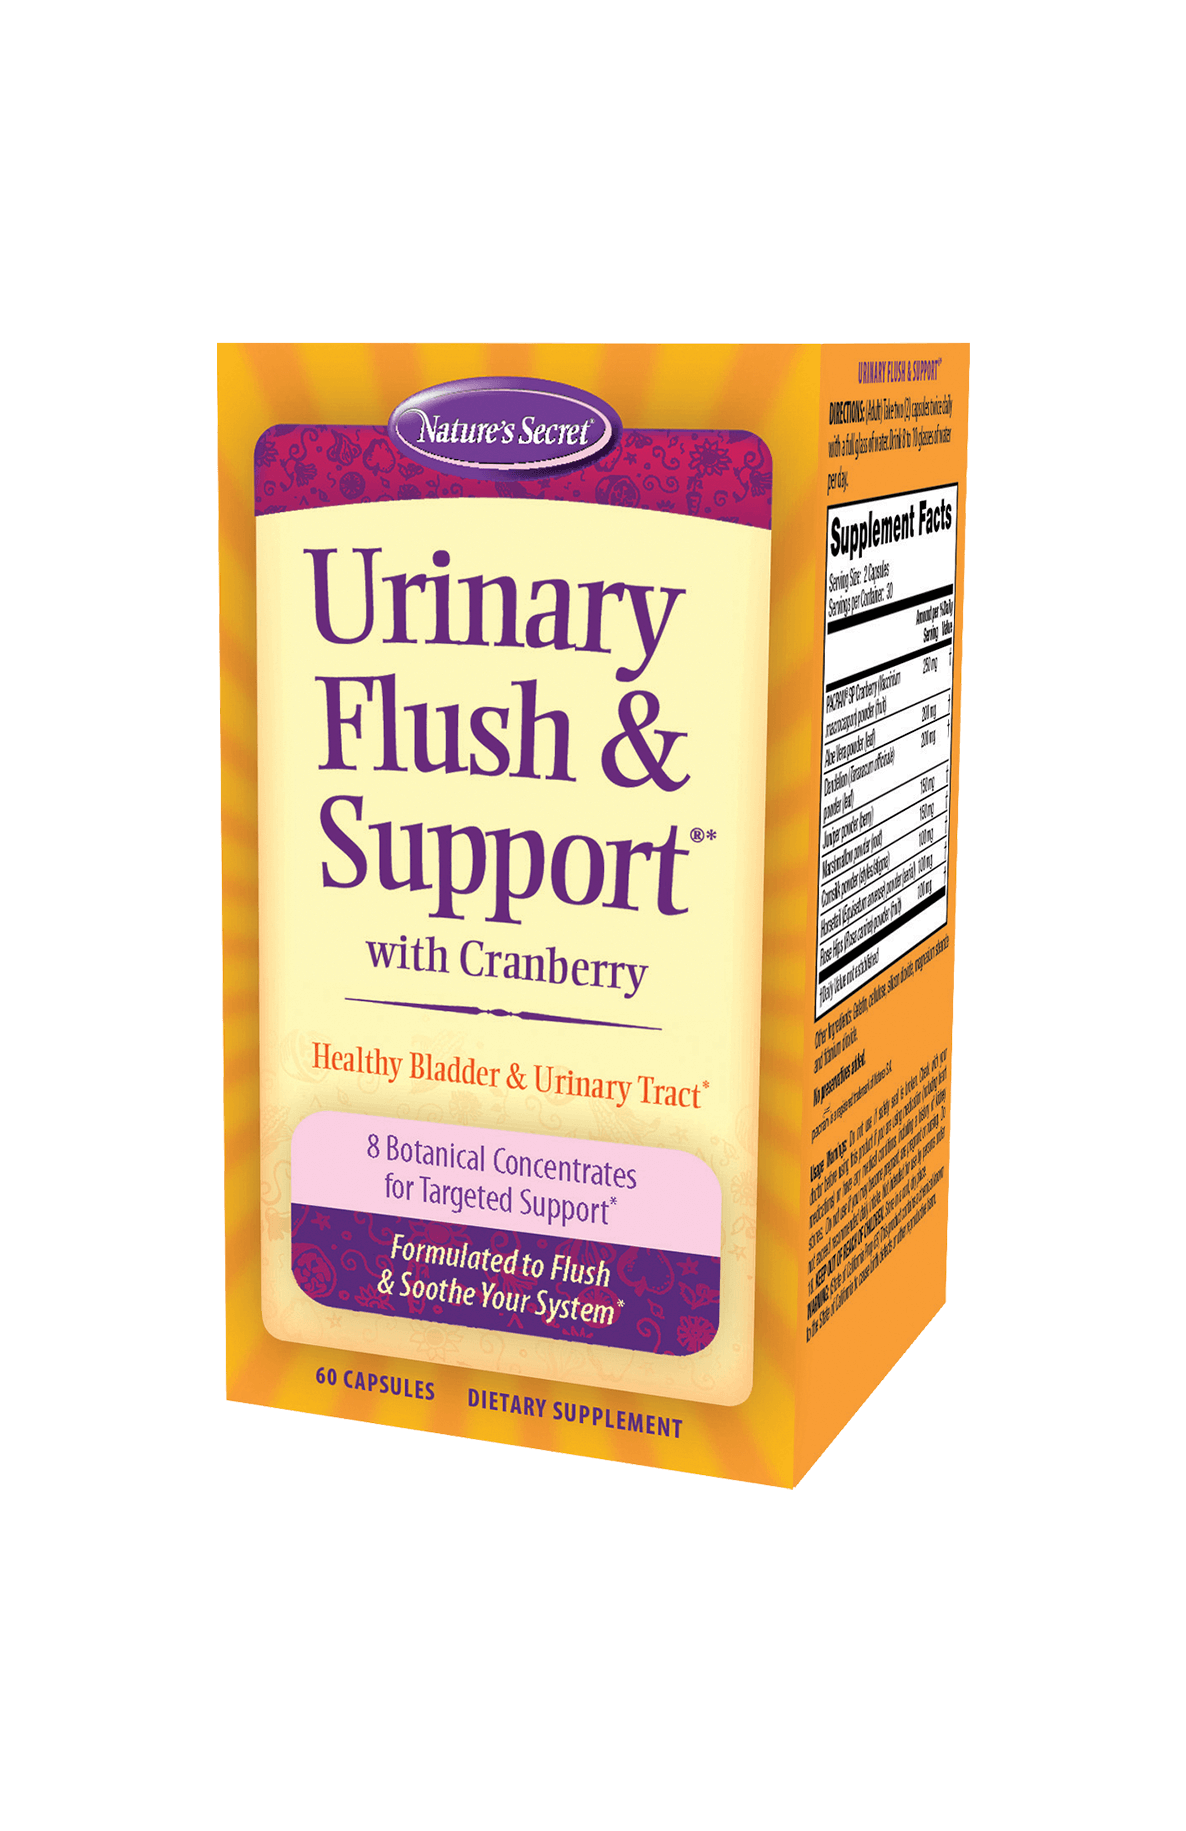 Urinary Flush and Support with Cranberry by Nature's Secret